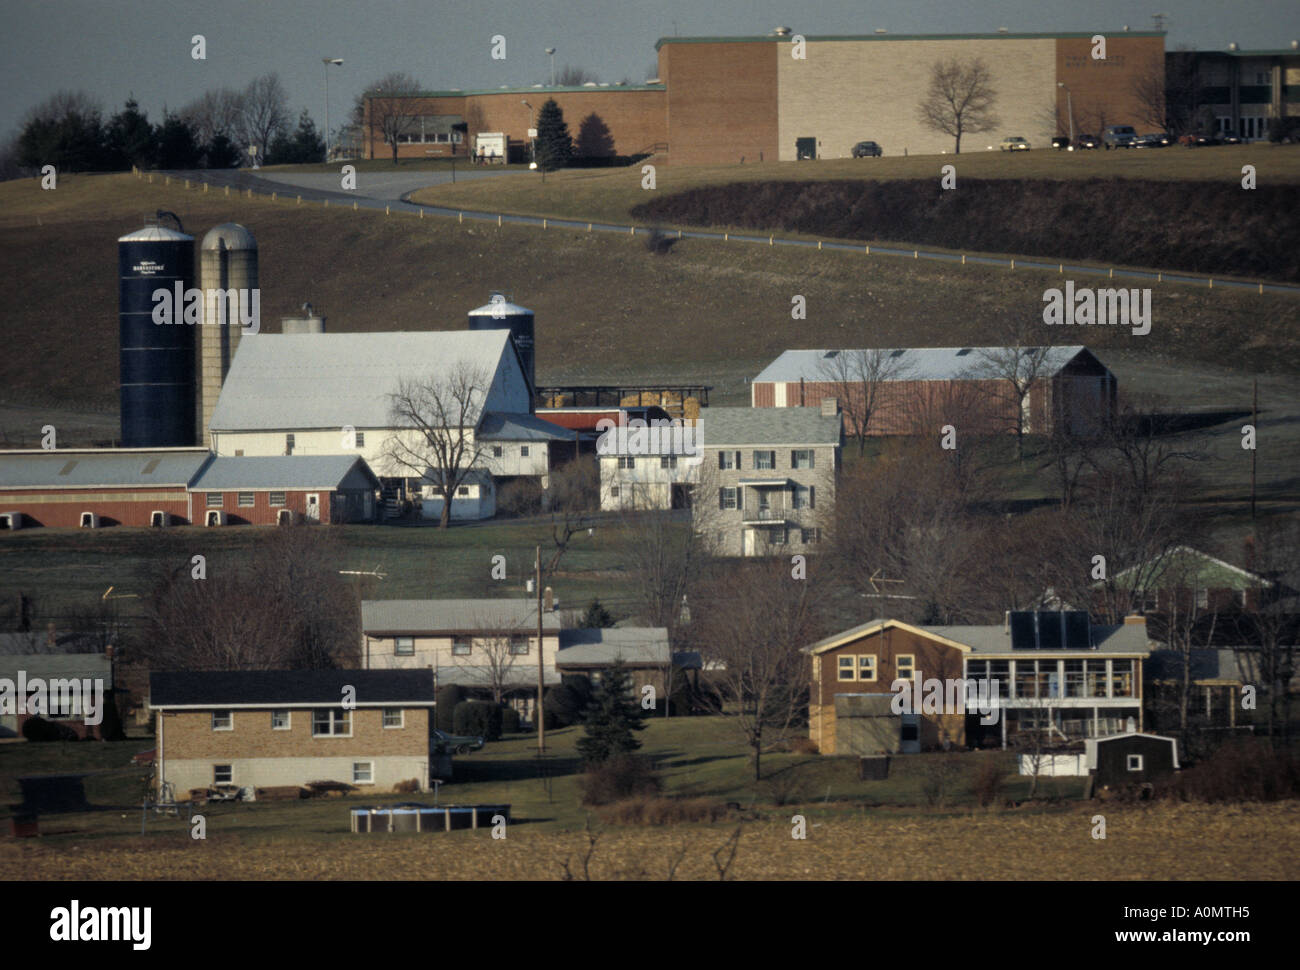 school farm houses crowded overcrowding rural loss of farm land urban sprawl landscape outside outdoor Stock Photo